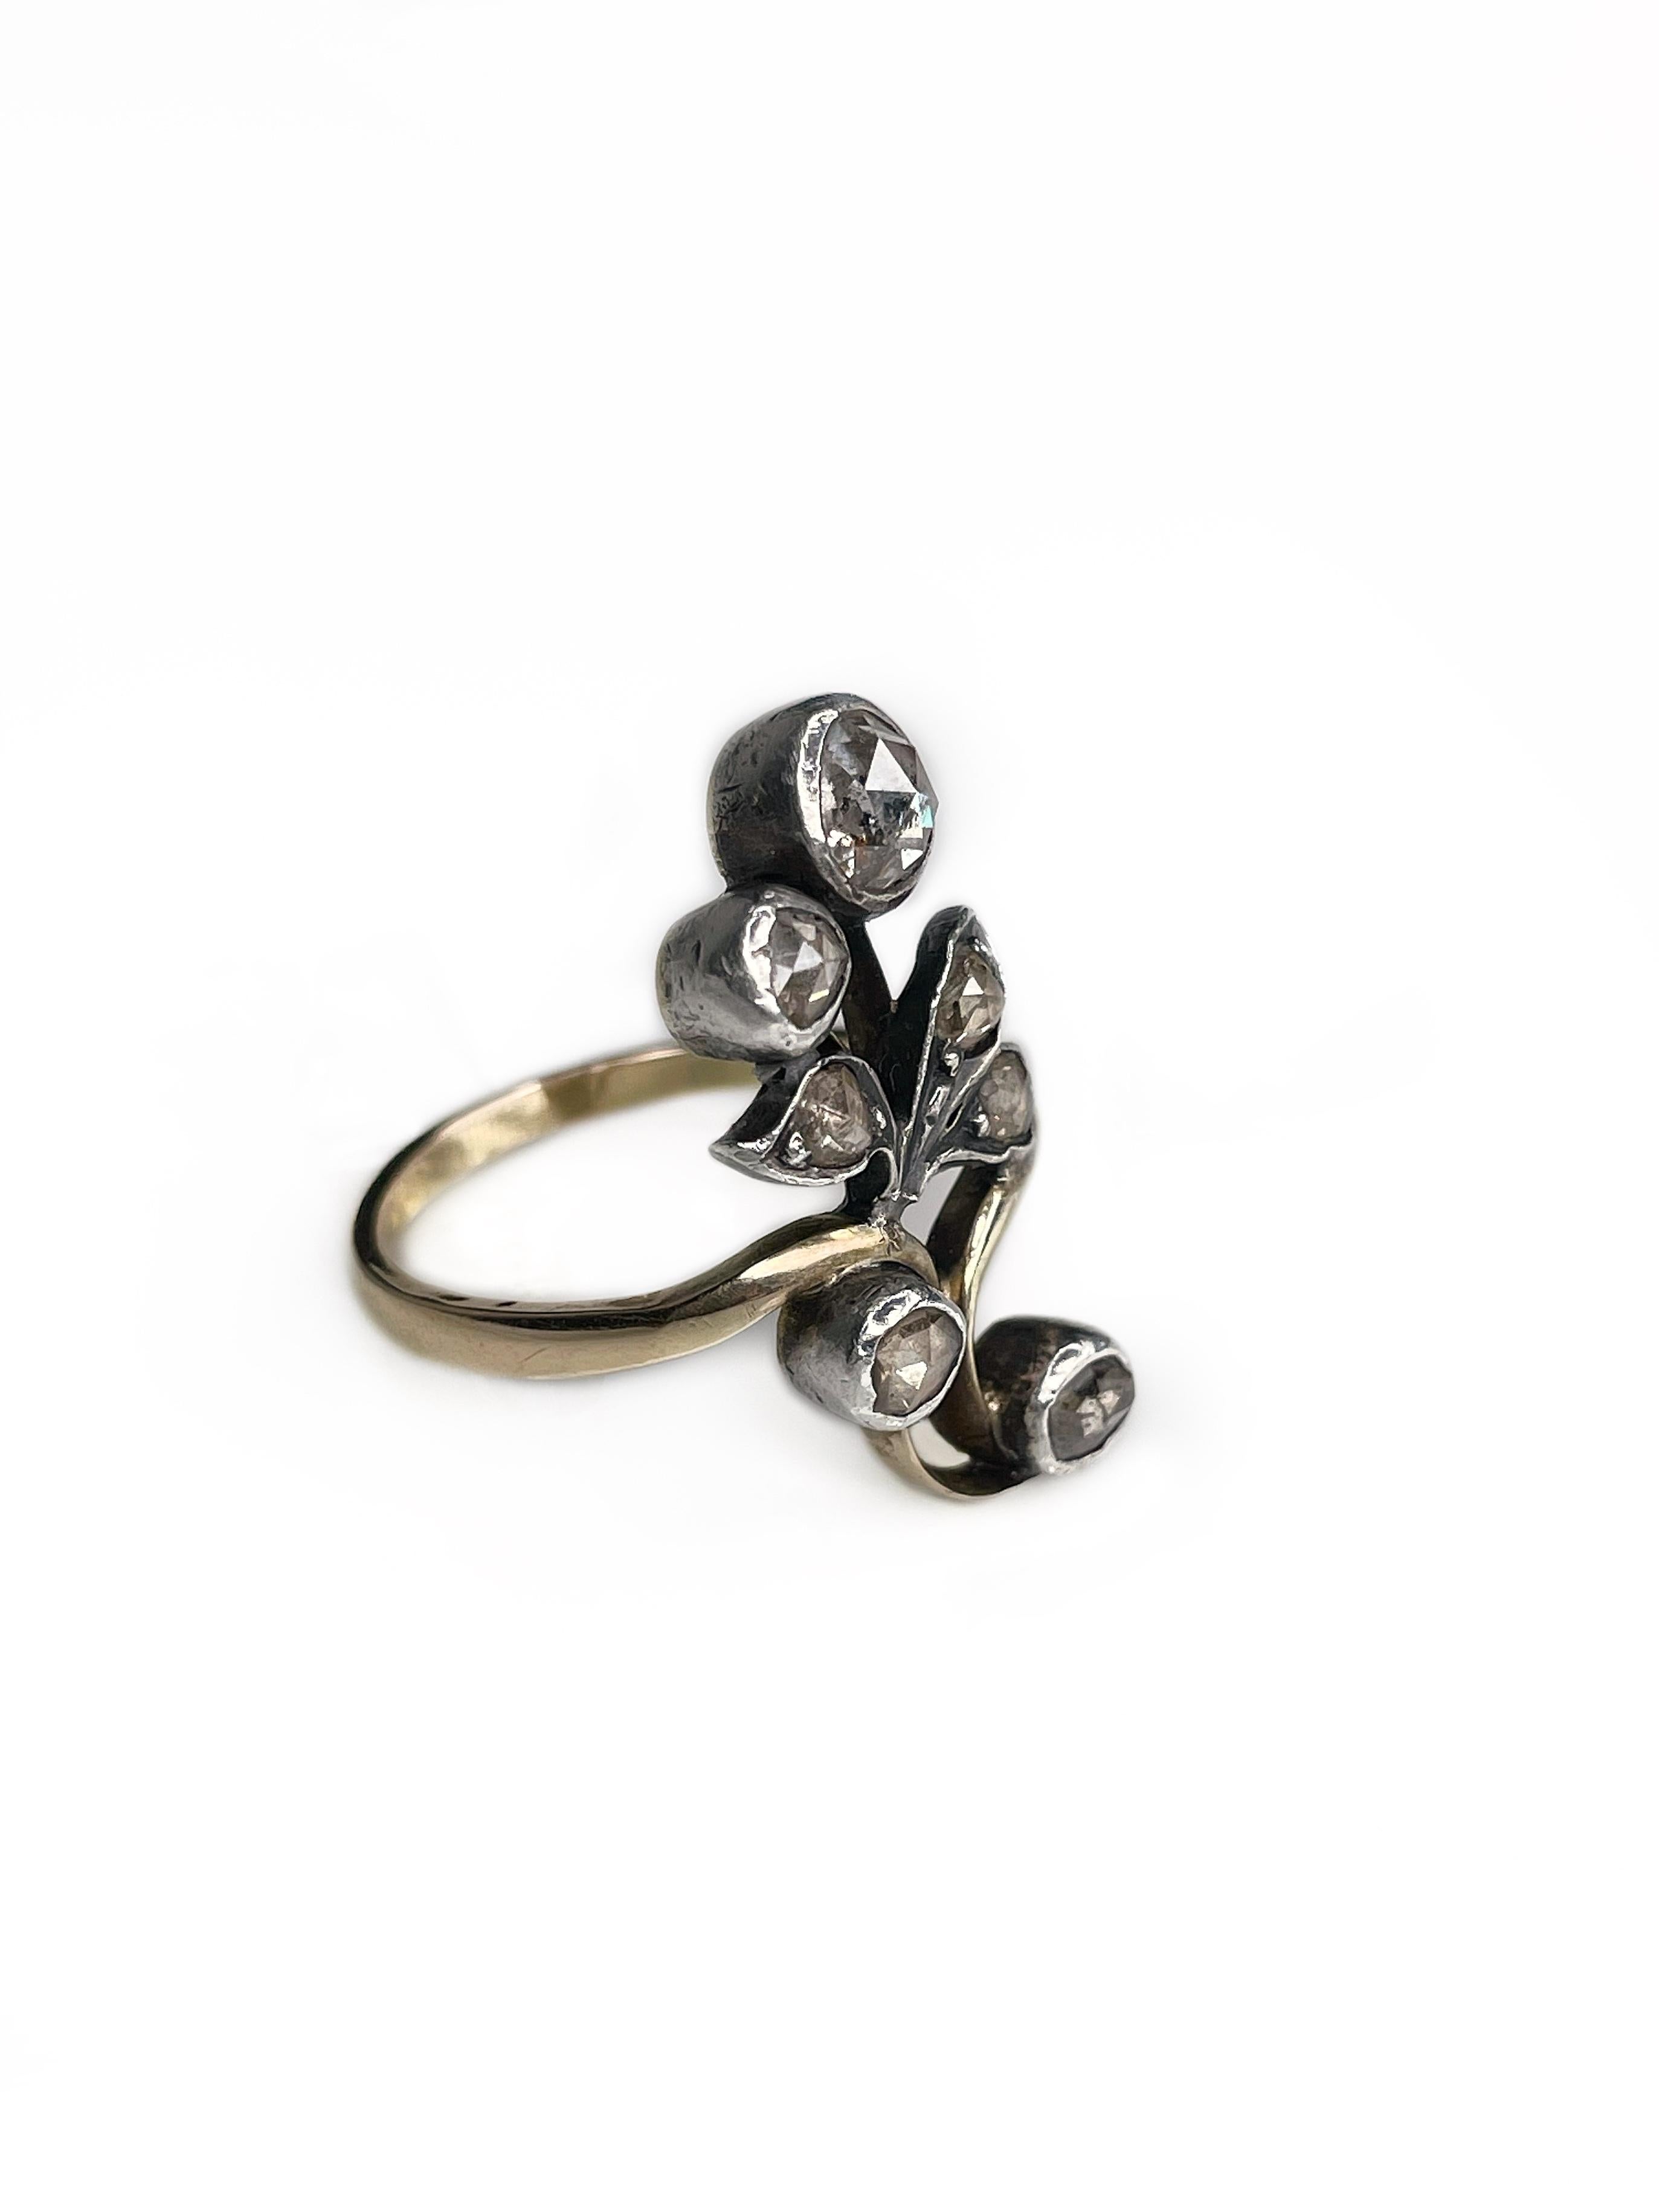 This is an antique Victorian floral design navette ring crafted in 18K gold and adorned with silver. The piece features 7 rose cut diamonds. It is a real treasure for all who seek something special or adore Victorian jewelry. 

Weight: 5.23g
Size: